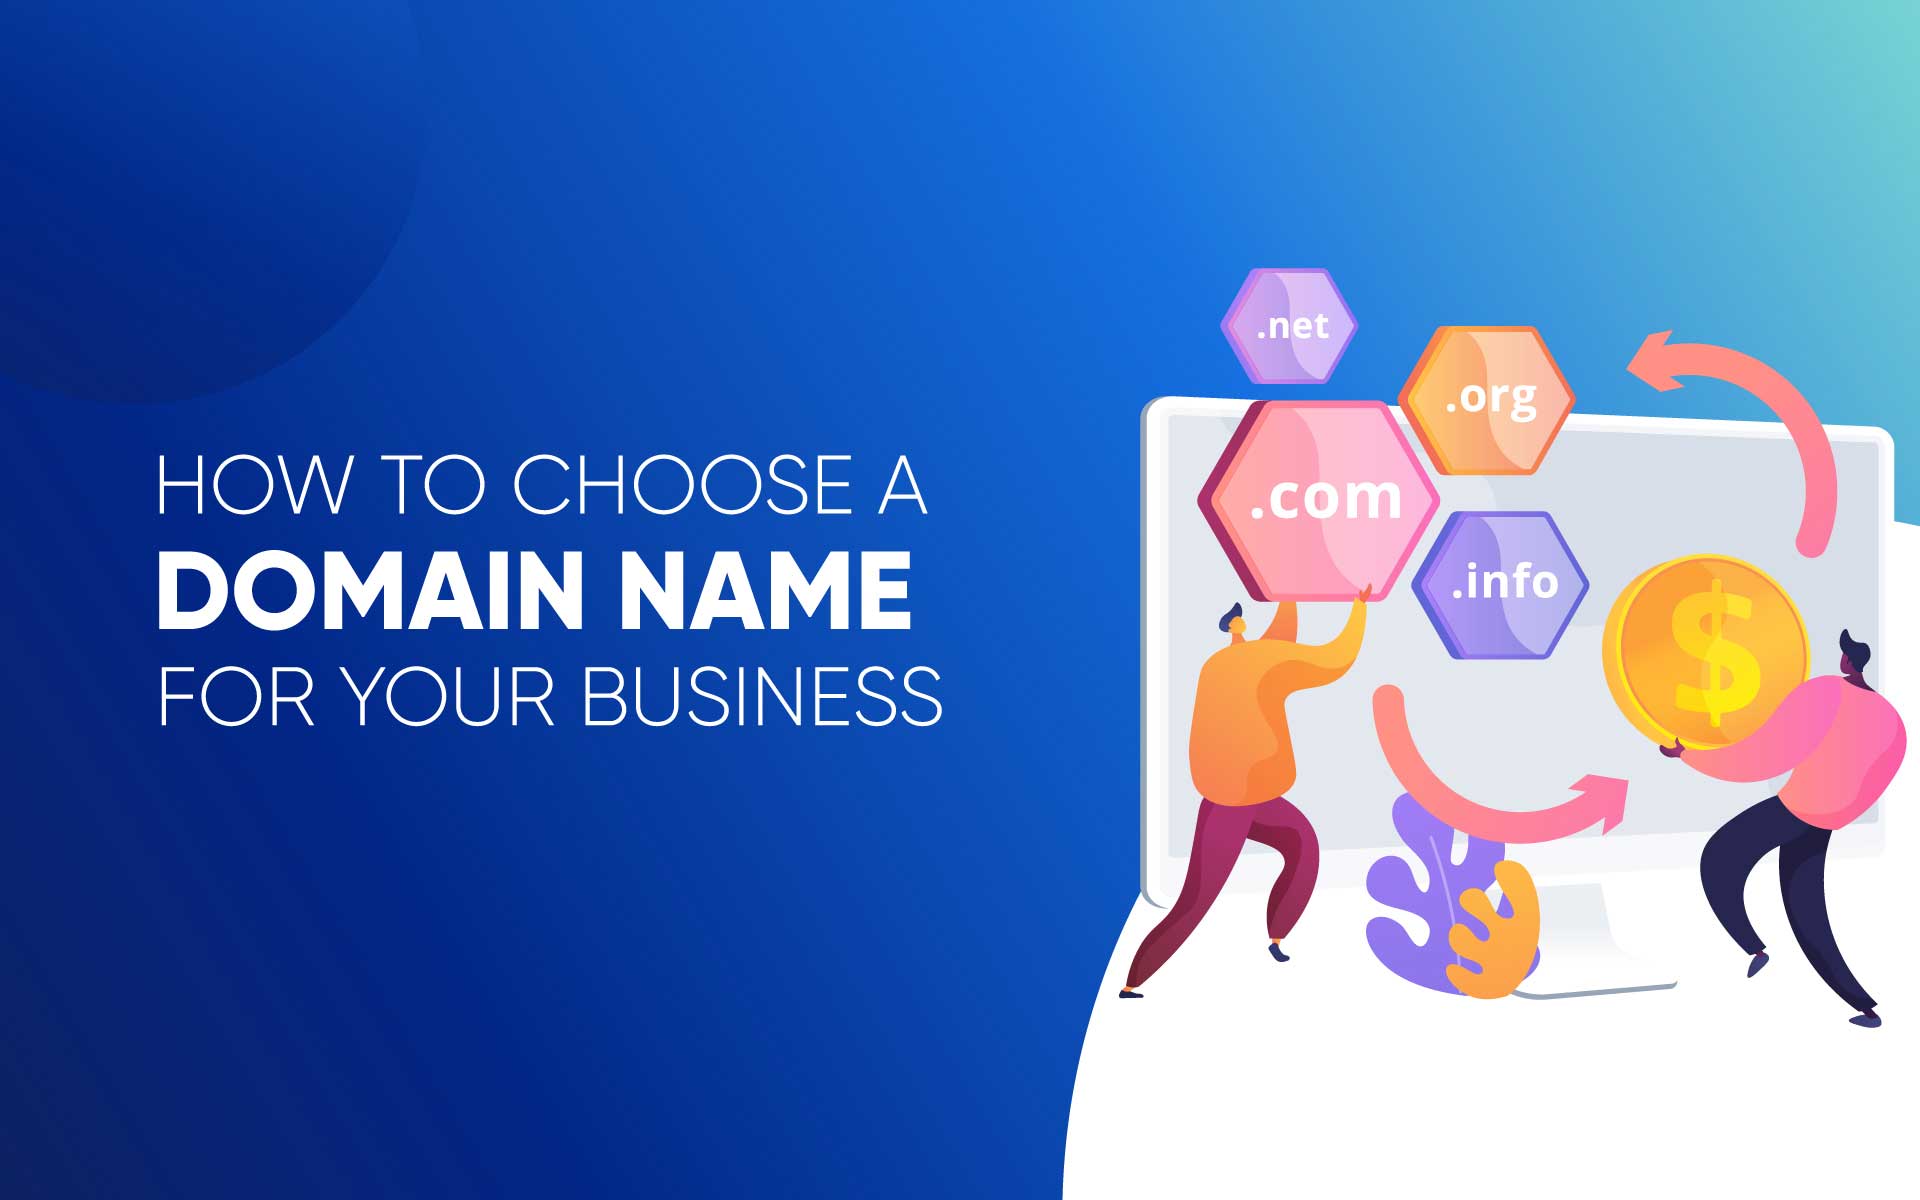 How to choose a domain name 